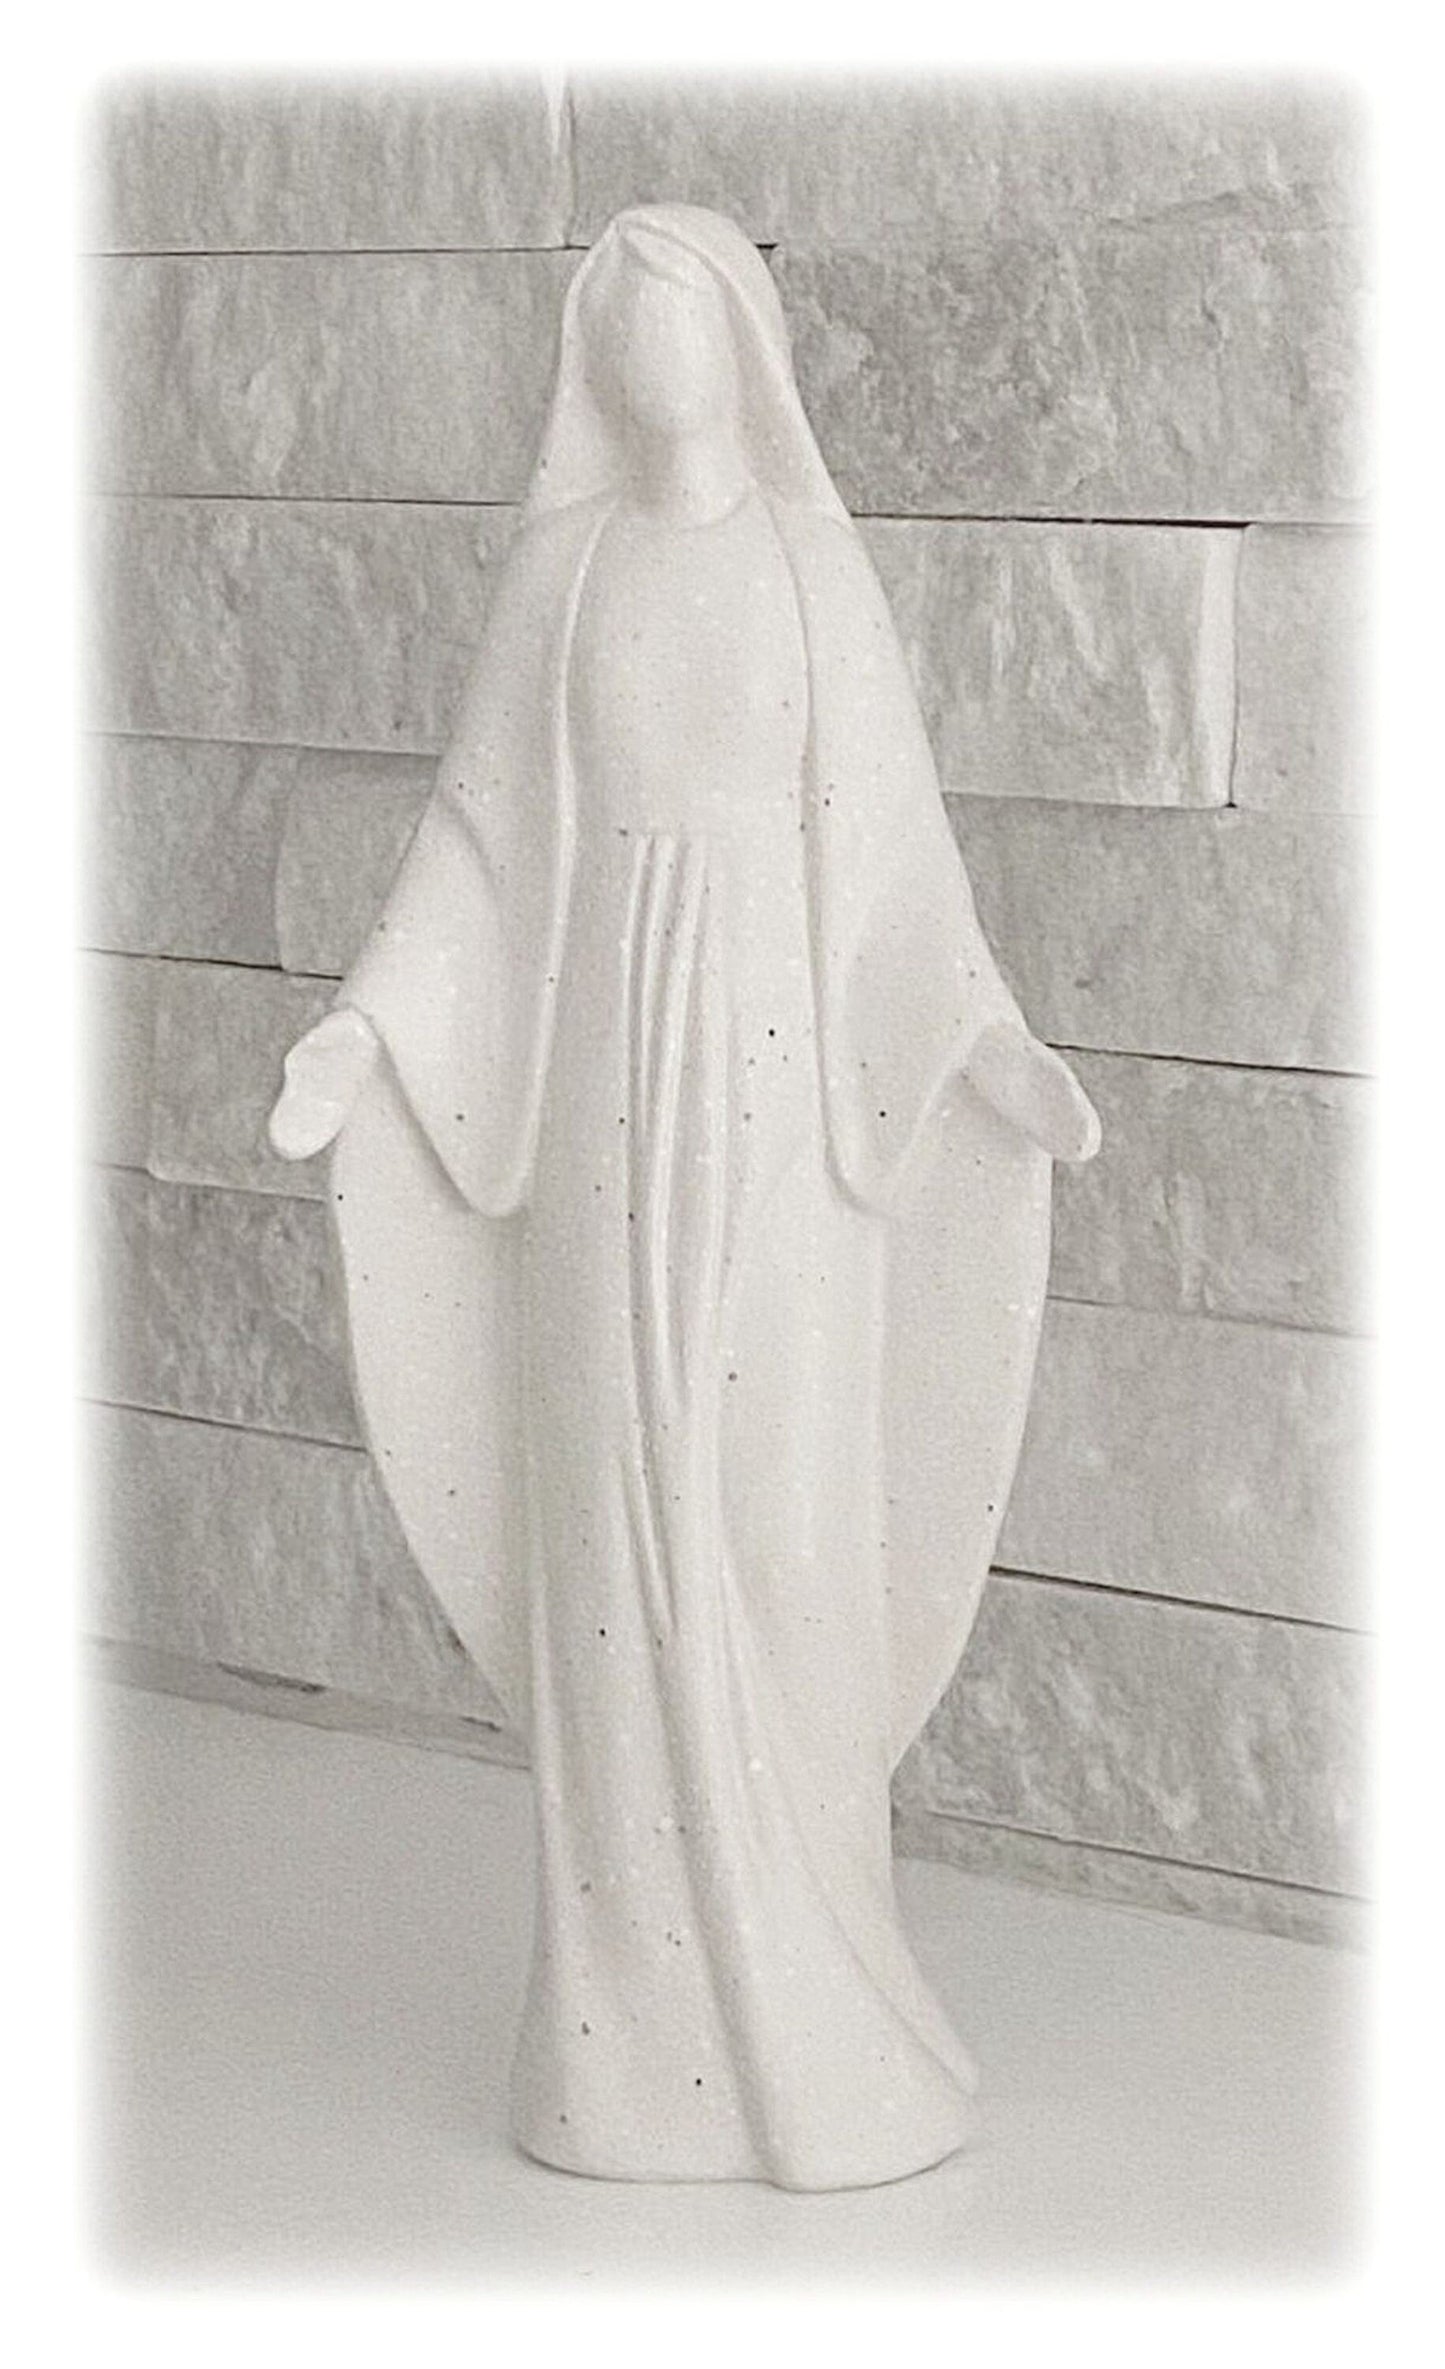 Statue of Virgin Mary with Prayer Card and Refrigerator Magnet